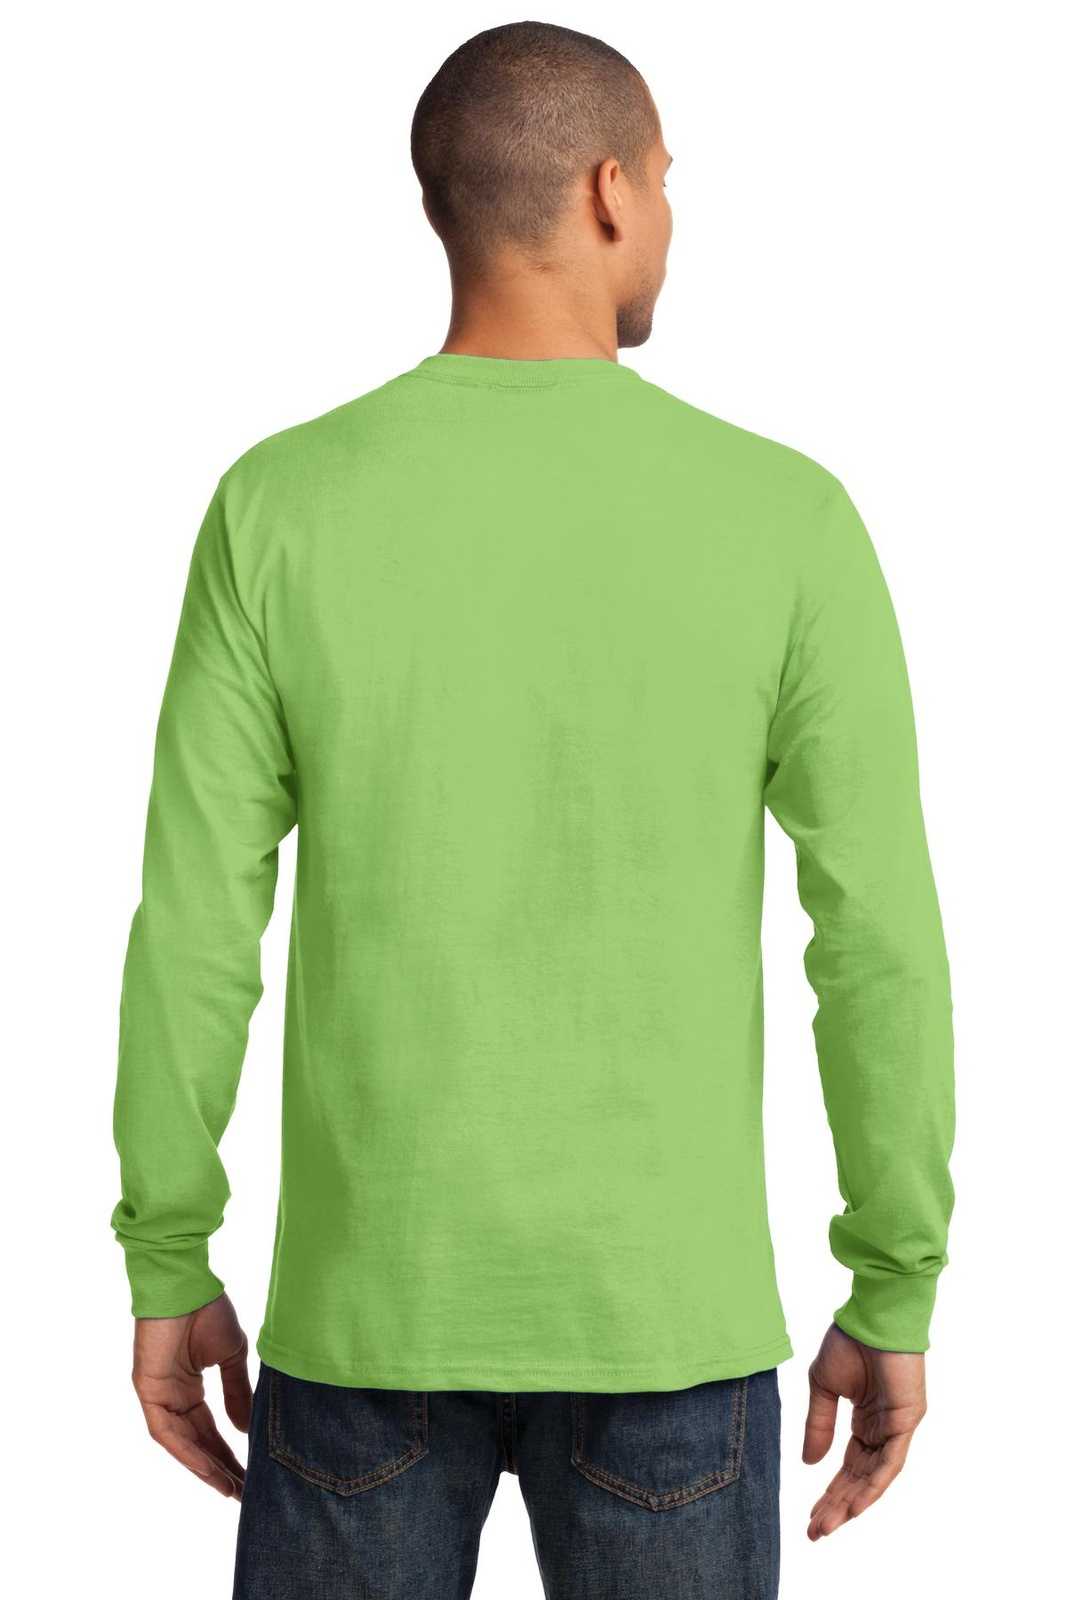 Port & Company PC61LST Tall Long Sleeve Essential Tee - Lime - HIT a Double - 1